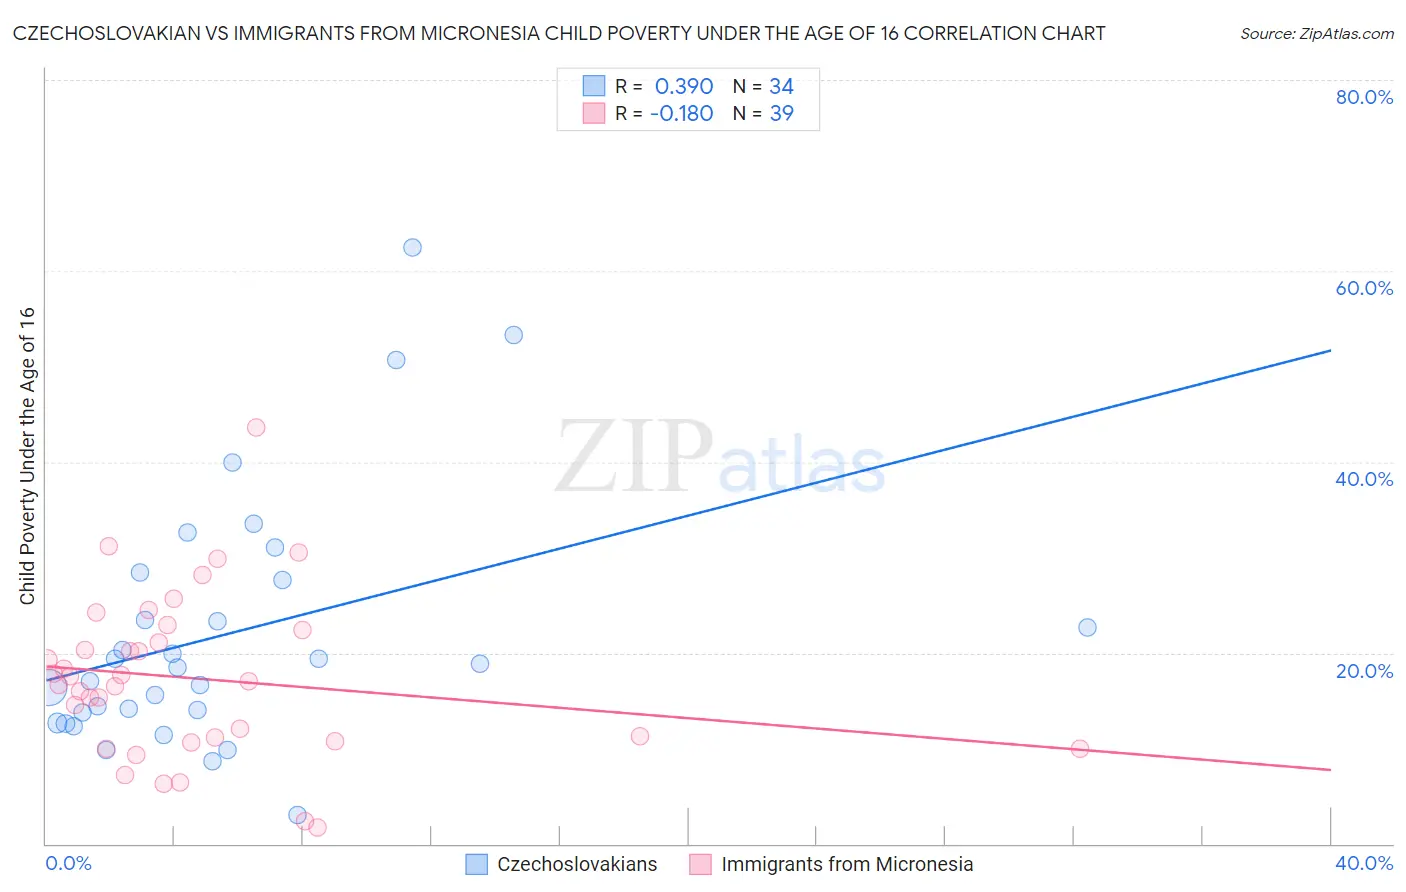 Czechoslovakian vs Immigrants from Micronesia Child Poverty Under the Age of 16